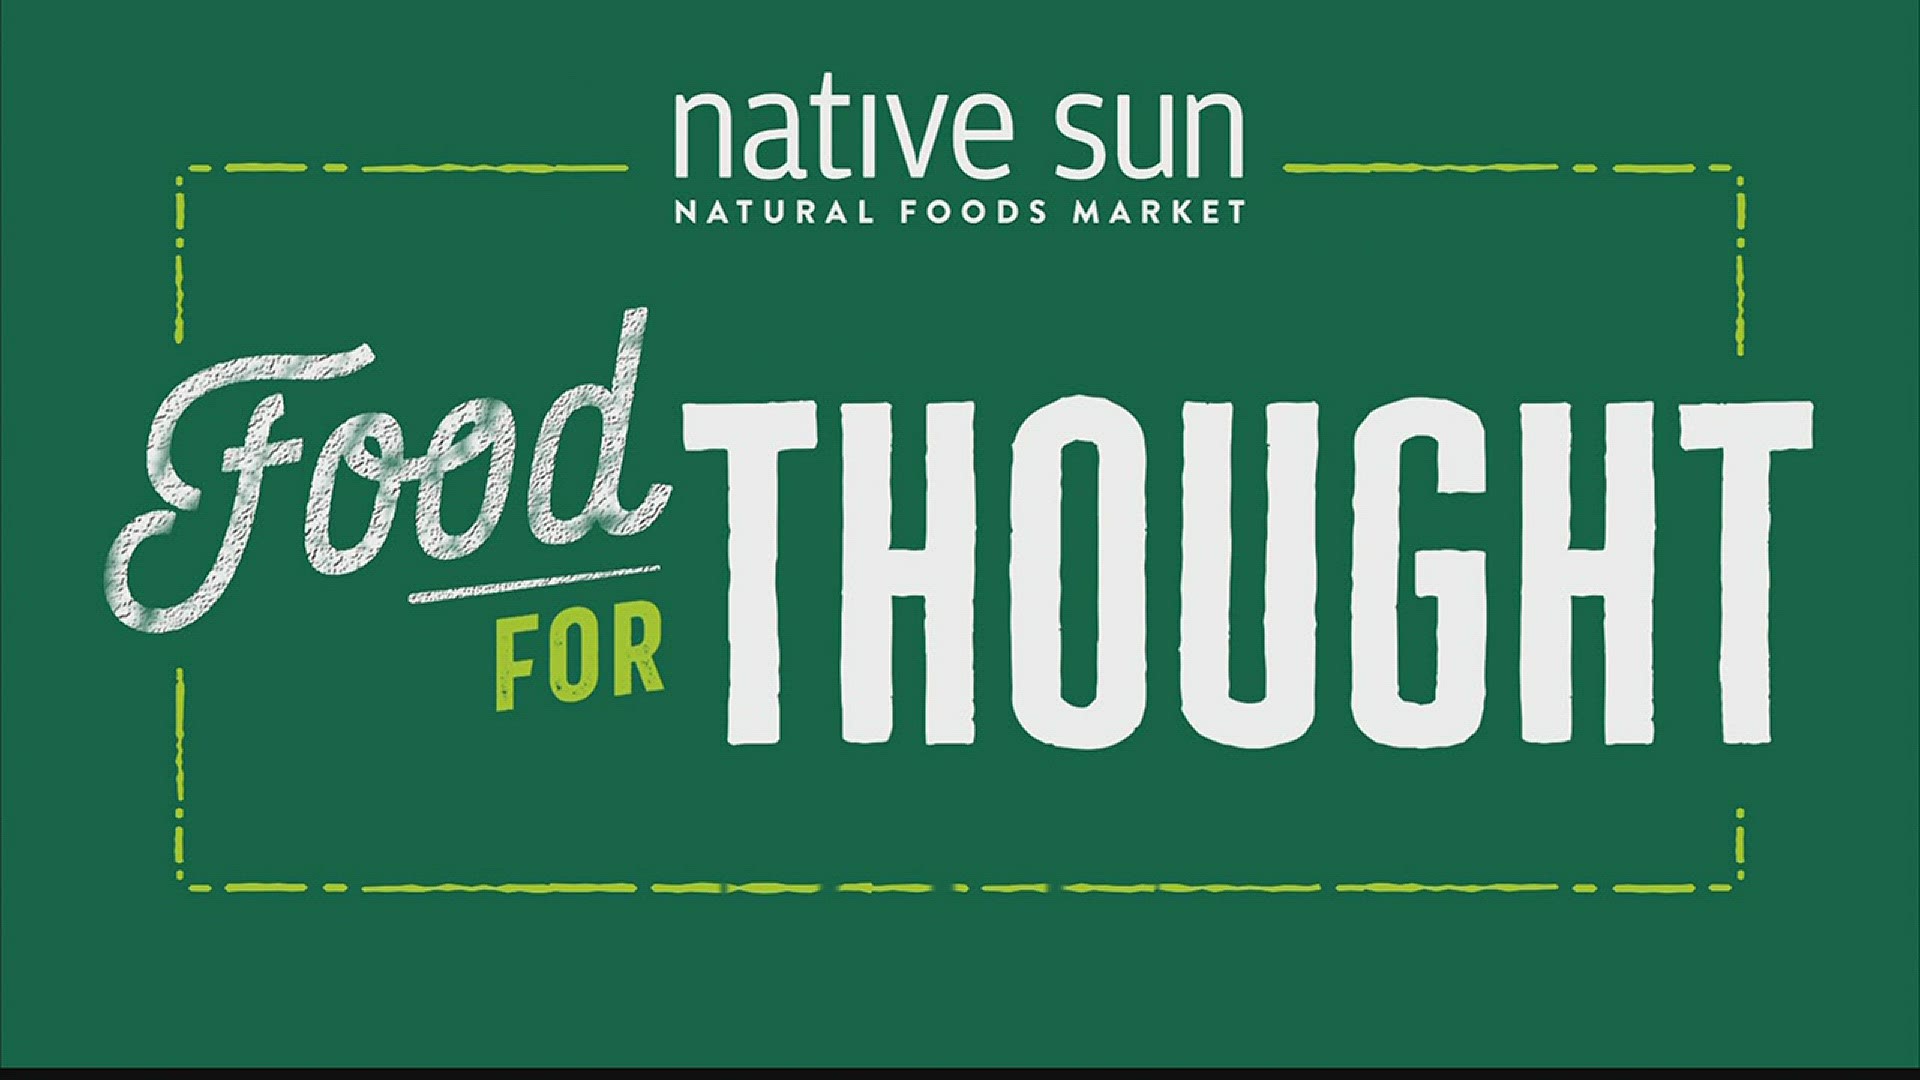 Native Sun's Owner Aaron Gottlieb brings in some Natural Pain Management Options